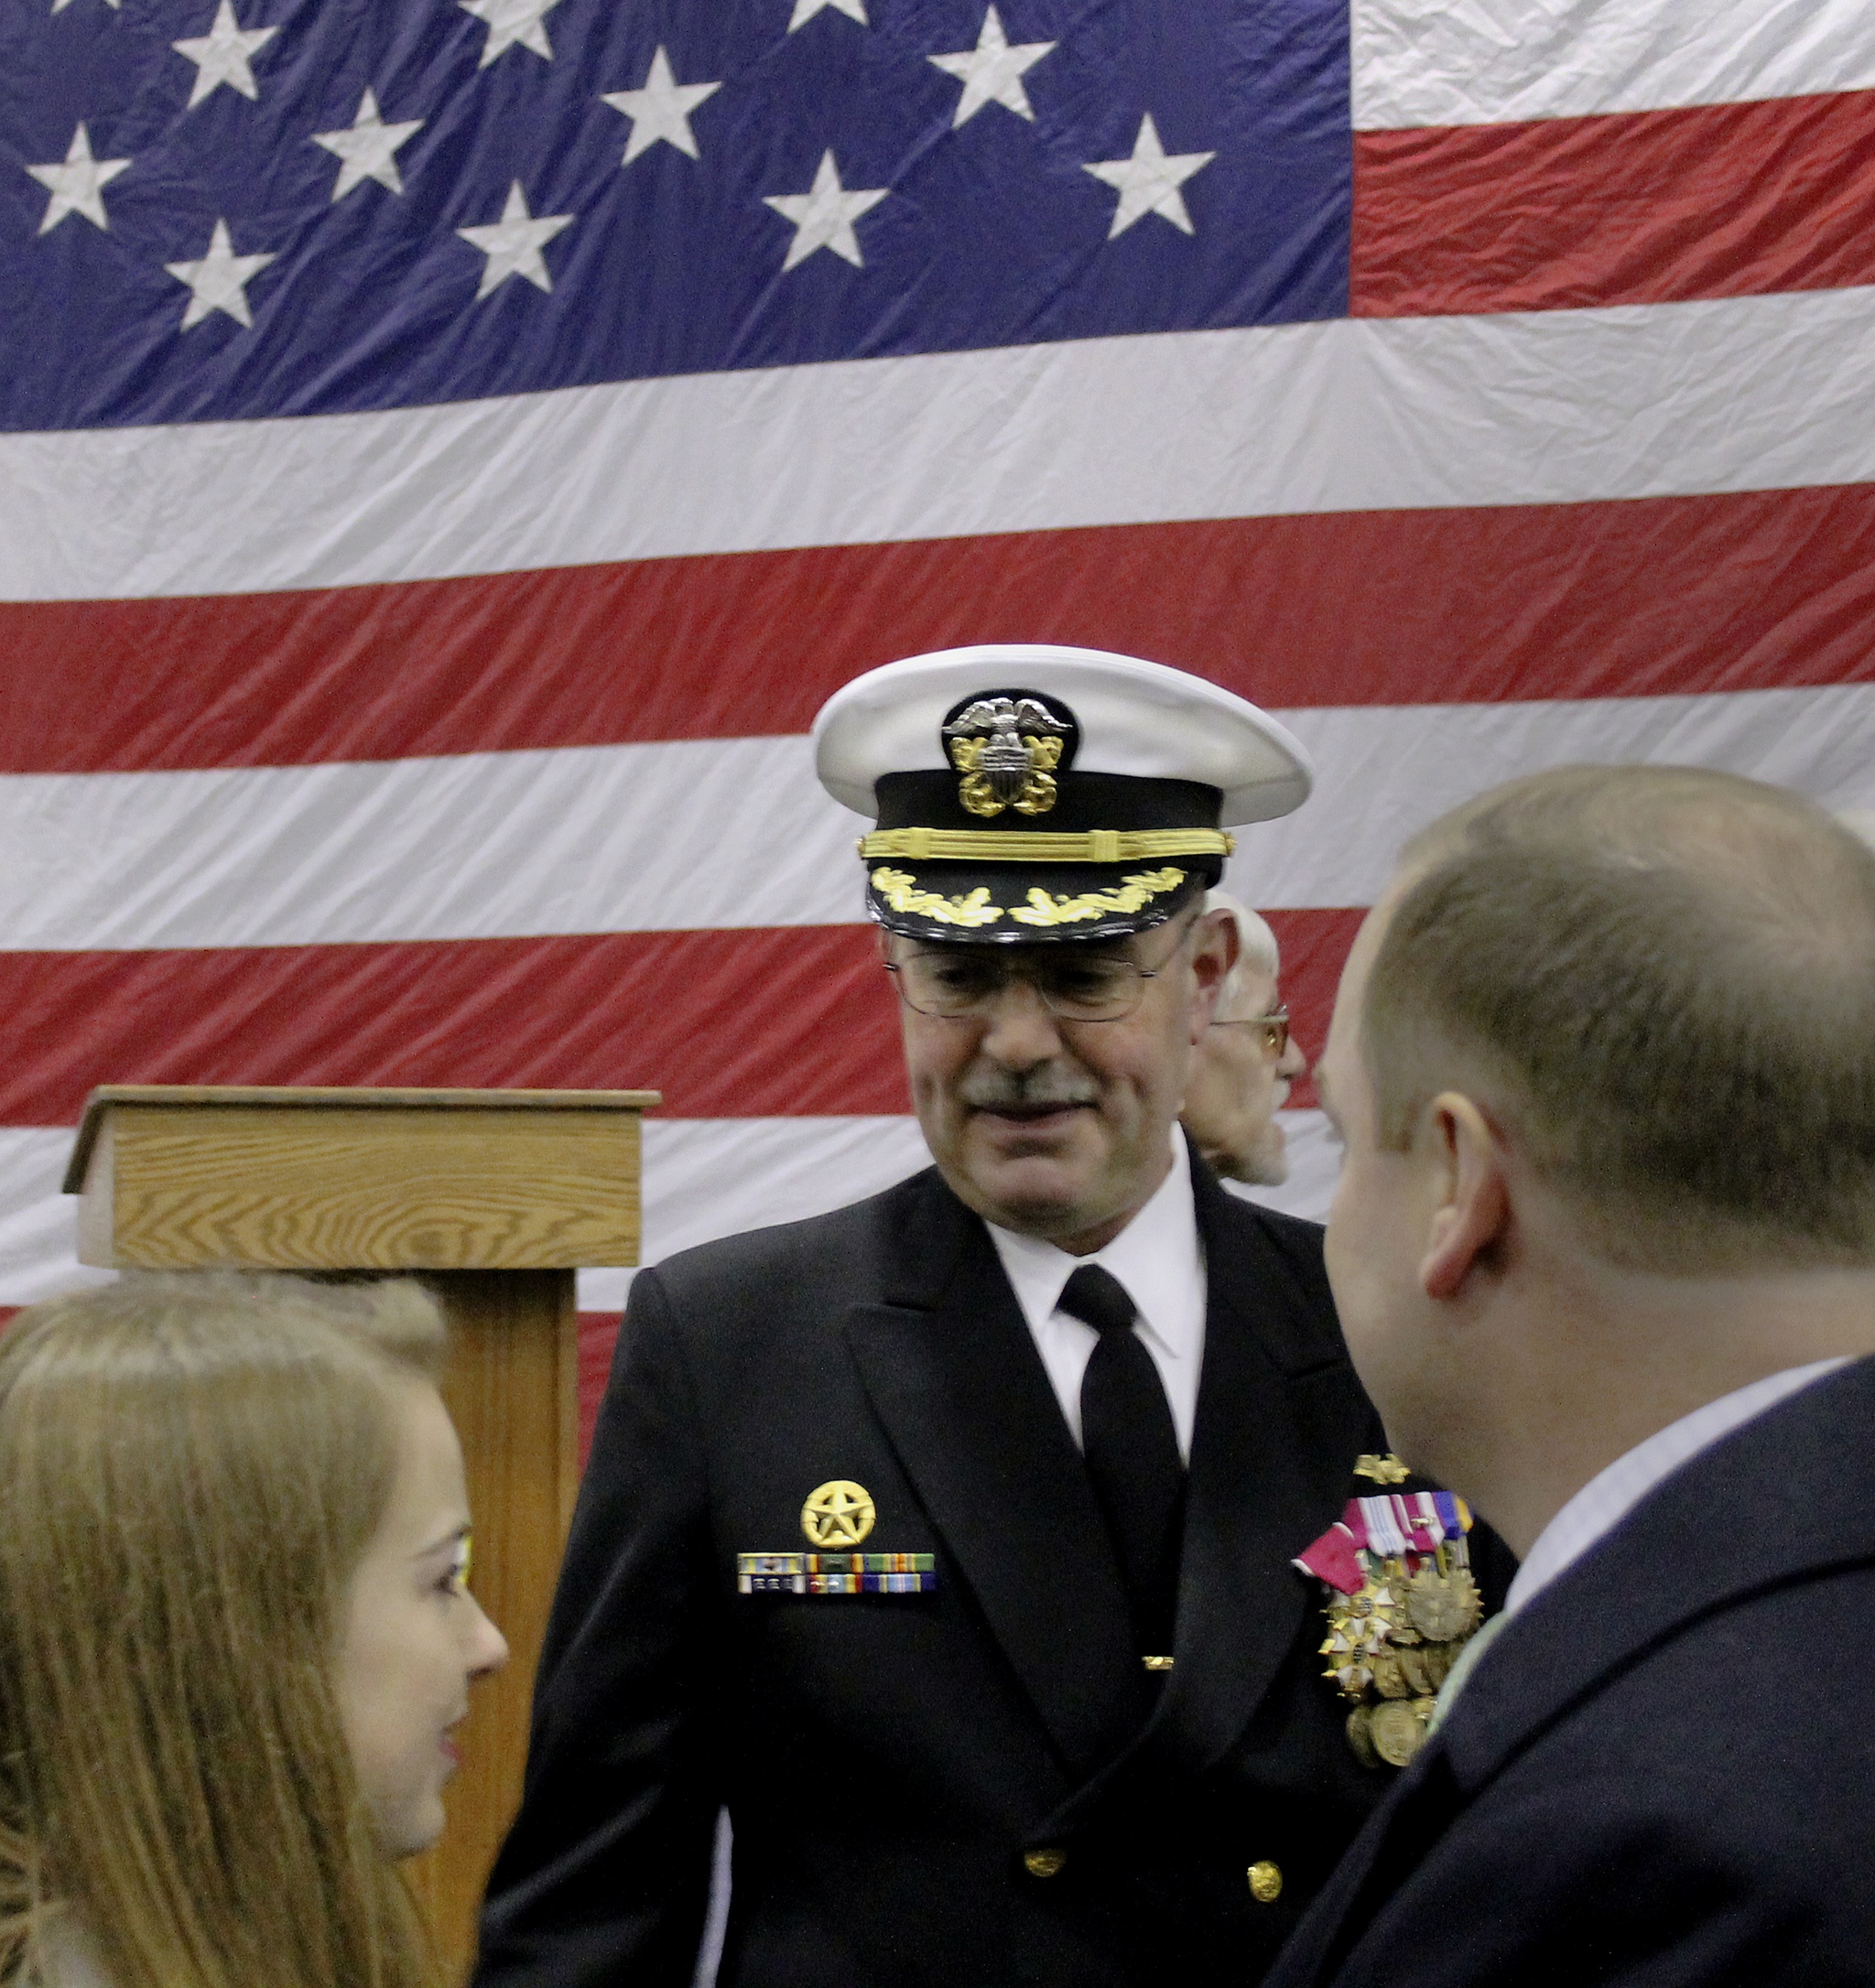 USS Nimitz change of command ceremony based on tradition, service and family